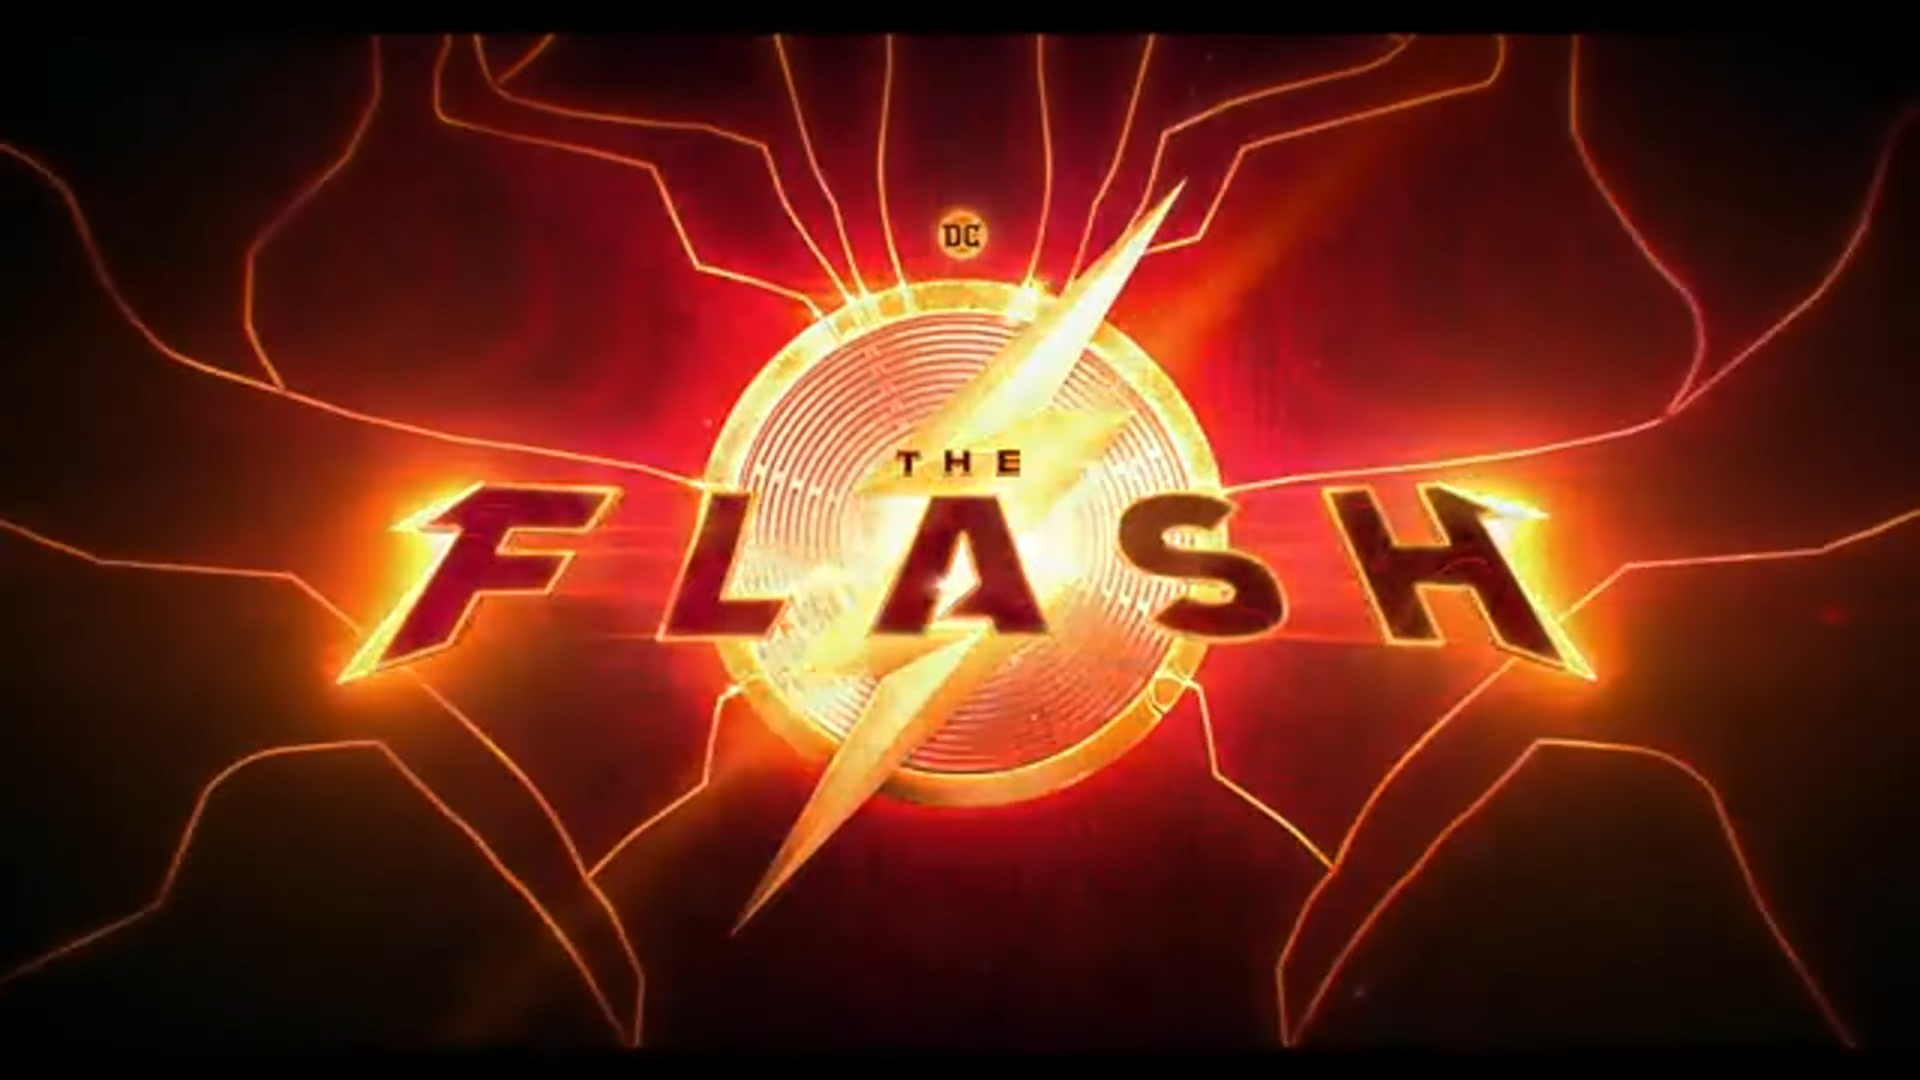 Slideshow: The Flash DC FanDome 2021 First Look Teaser Image